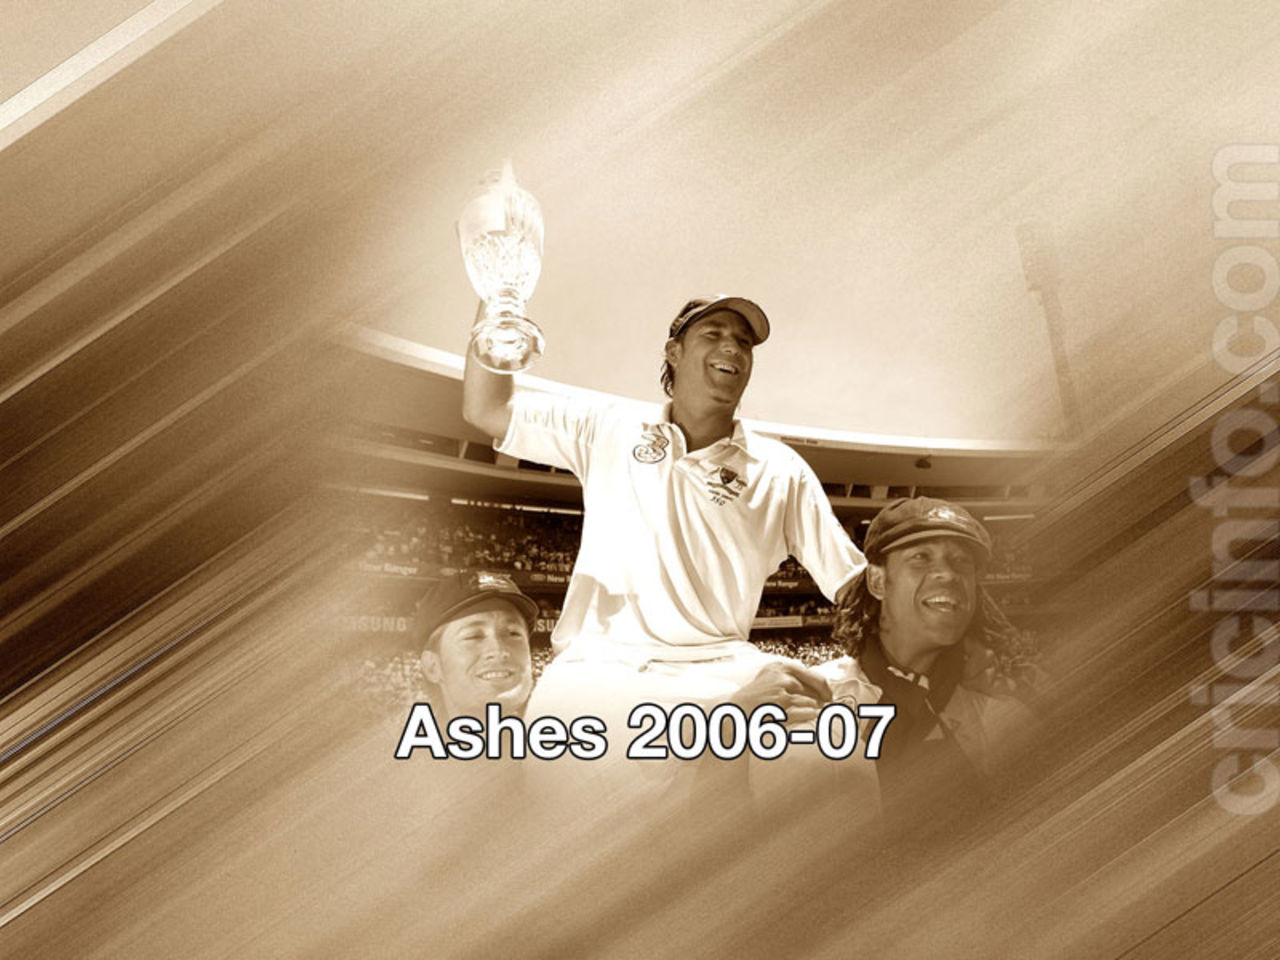 Shane Warne with the Ashes Trophy